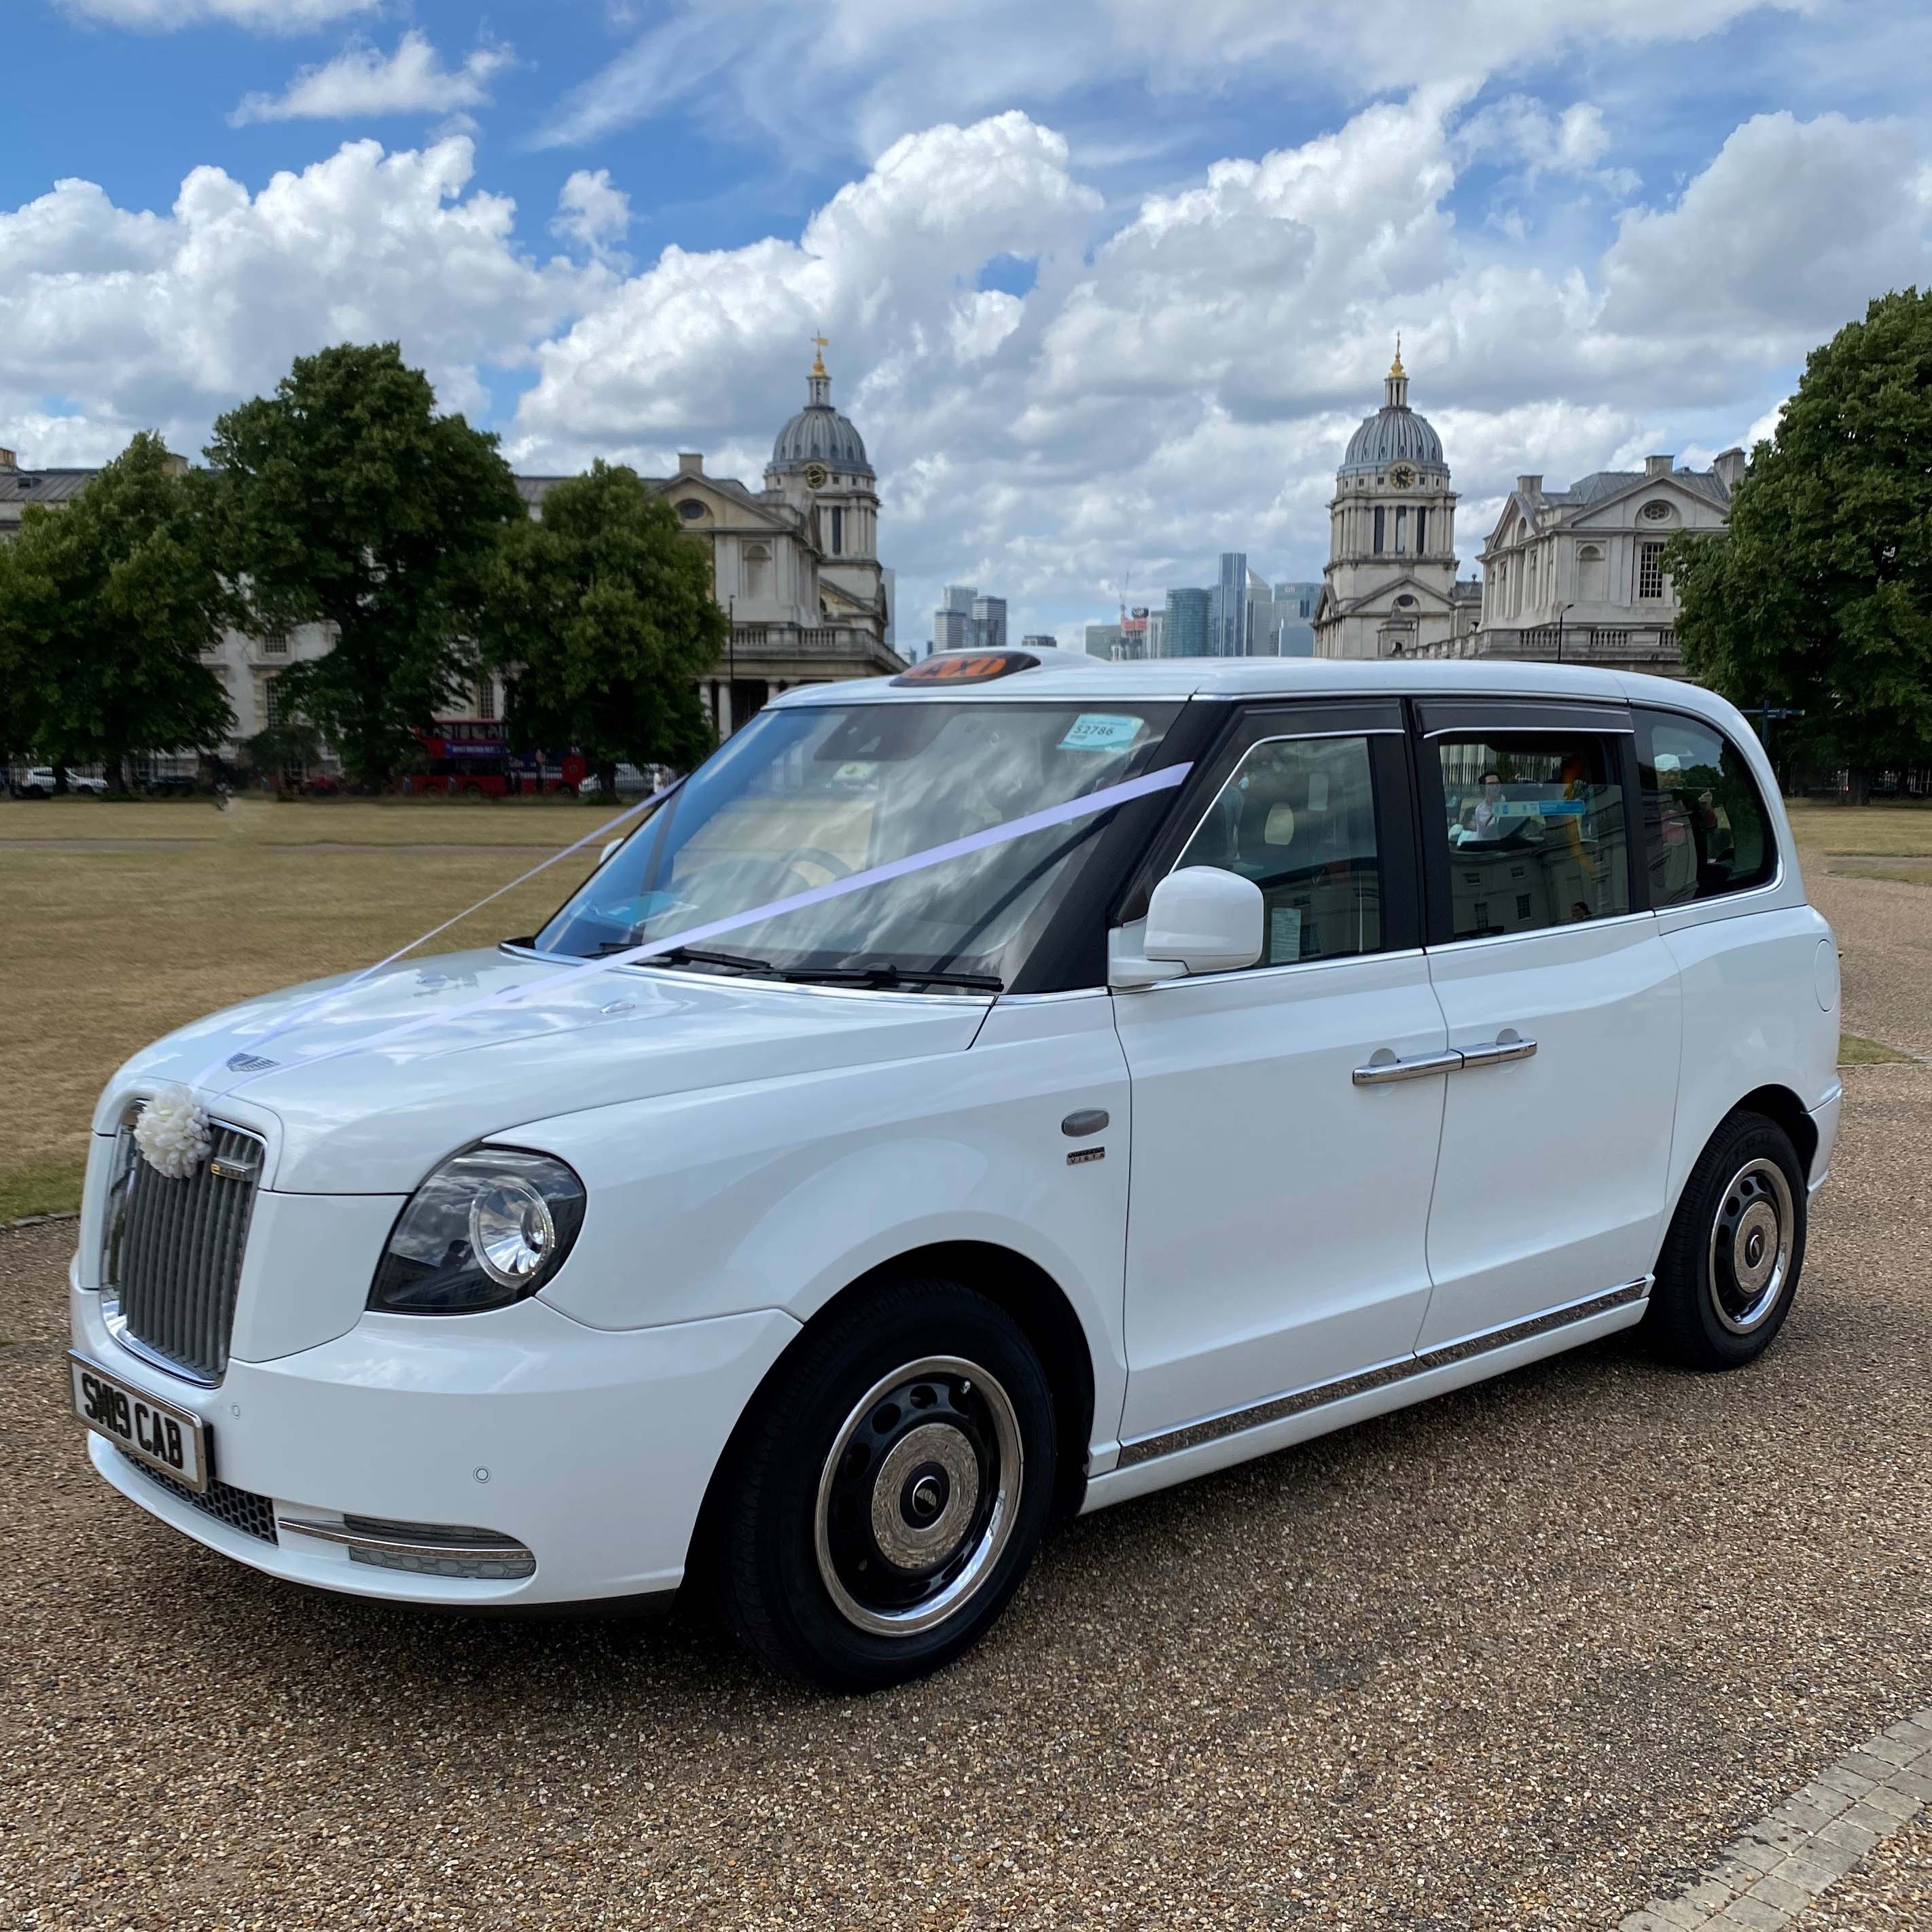 Fully electric White Taxi Cab decorated with ivory ribbons and bow on its front grill.